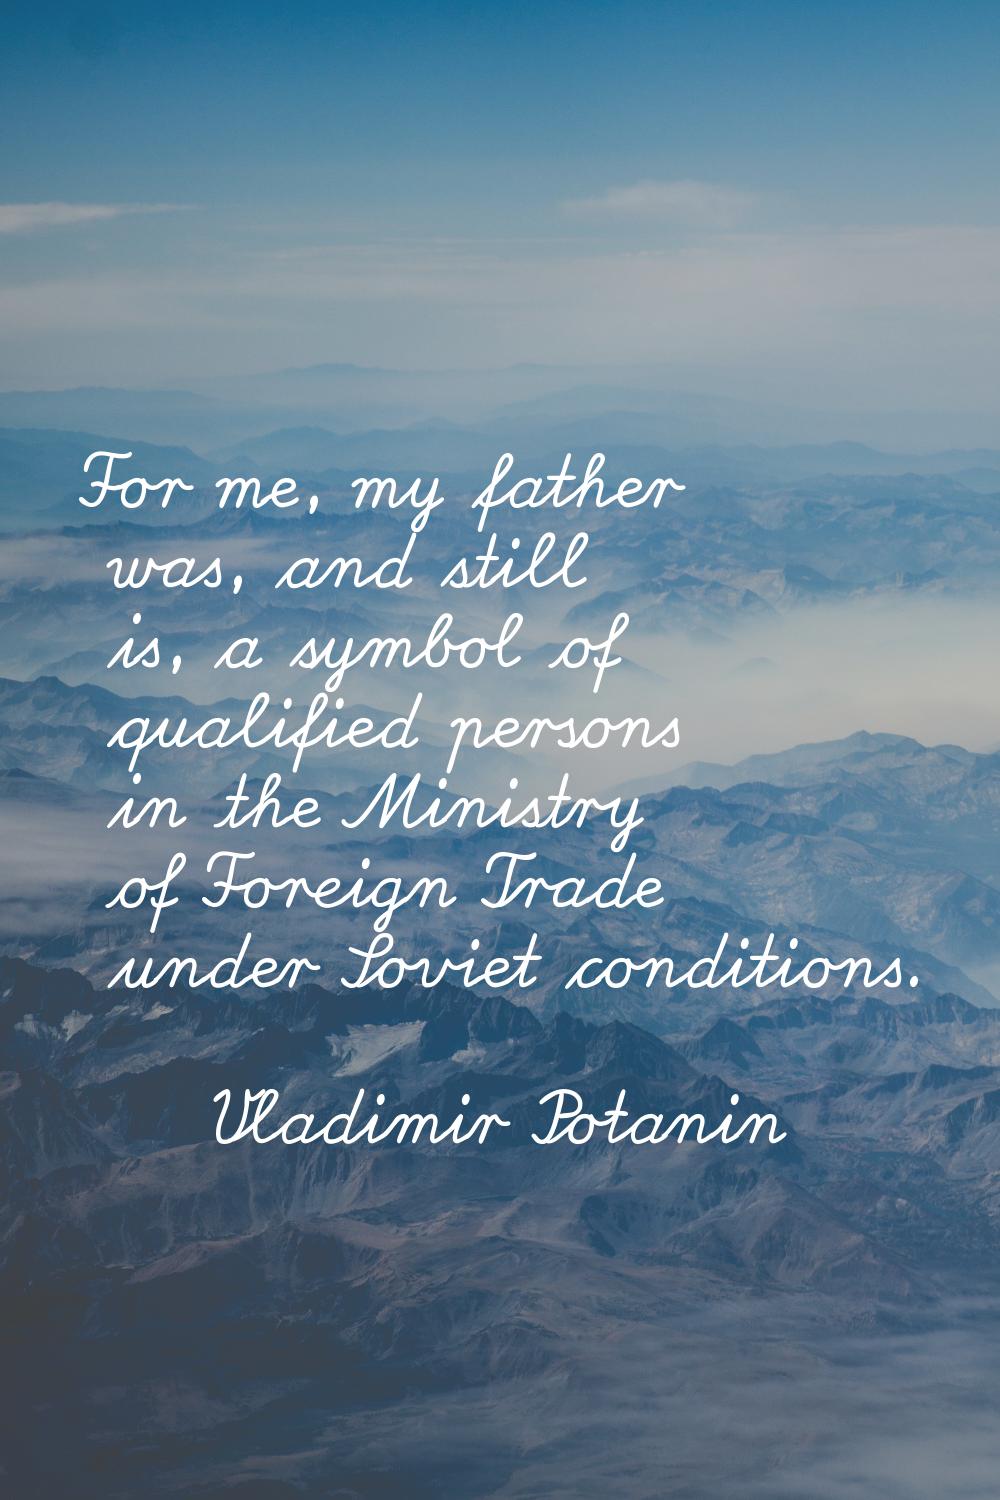 For me, my father was, and still is, a symbol of qualified persons in the Ministry of Foreign Trade